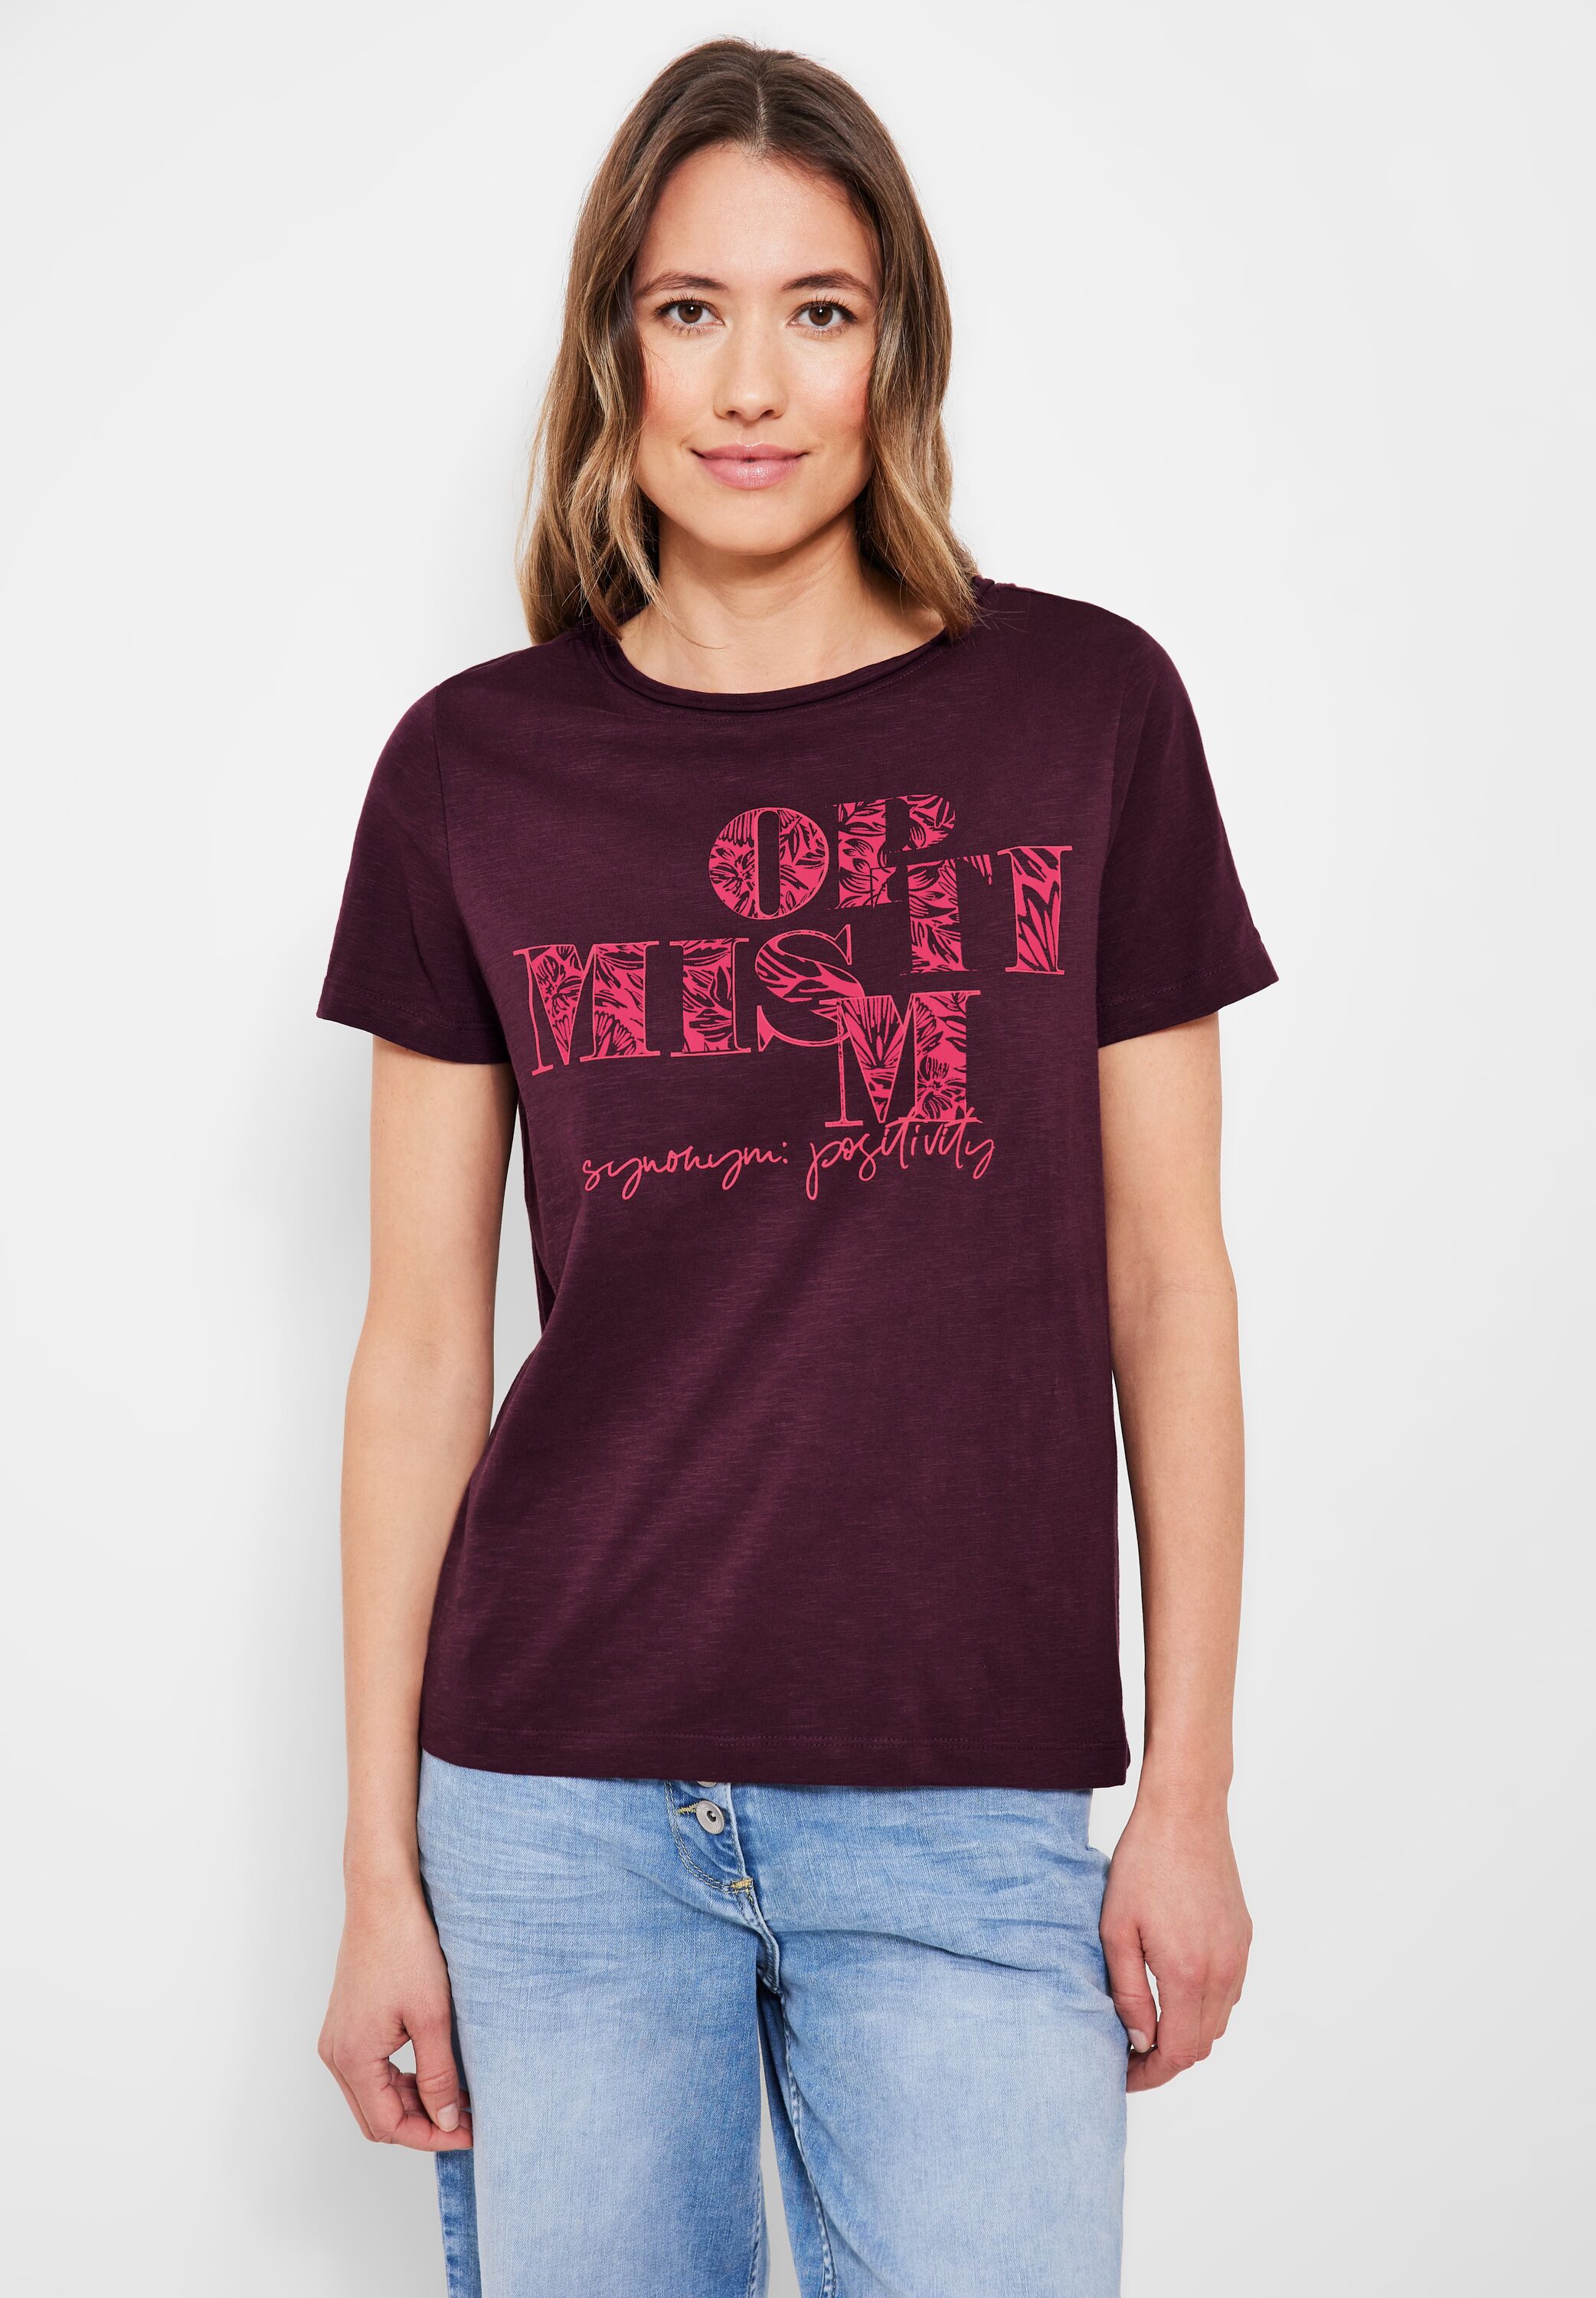 CECIL T-Shirt in CONCEPT B319637-34918 - SALE im Wineberry Mode reduziert Red